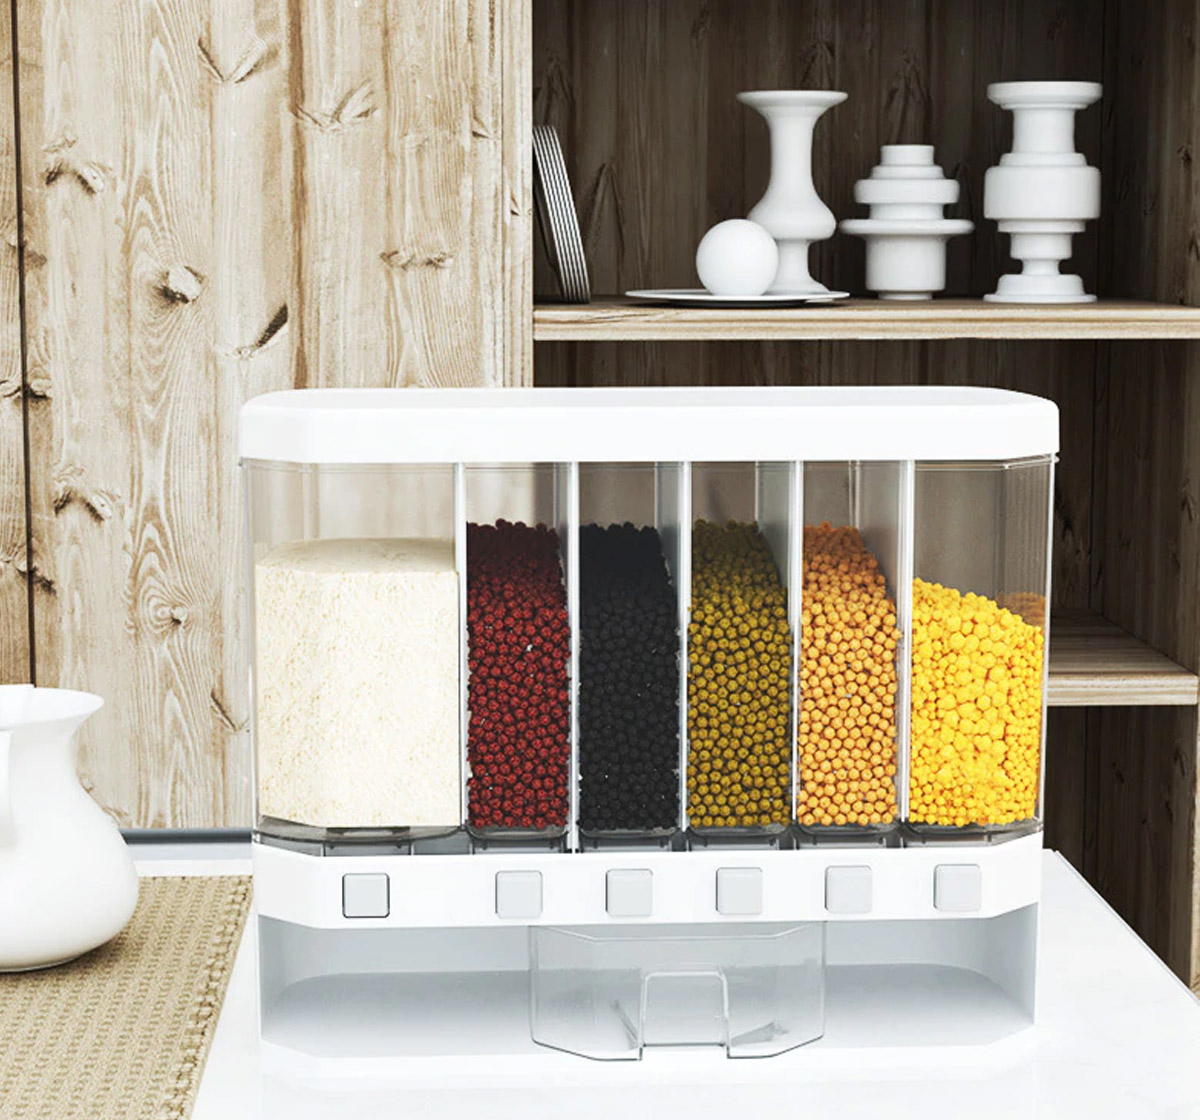 Push button wall mounted food dispenser